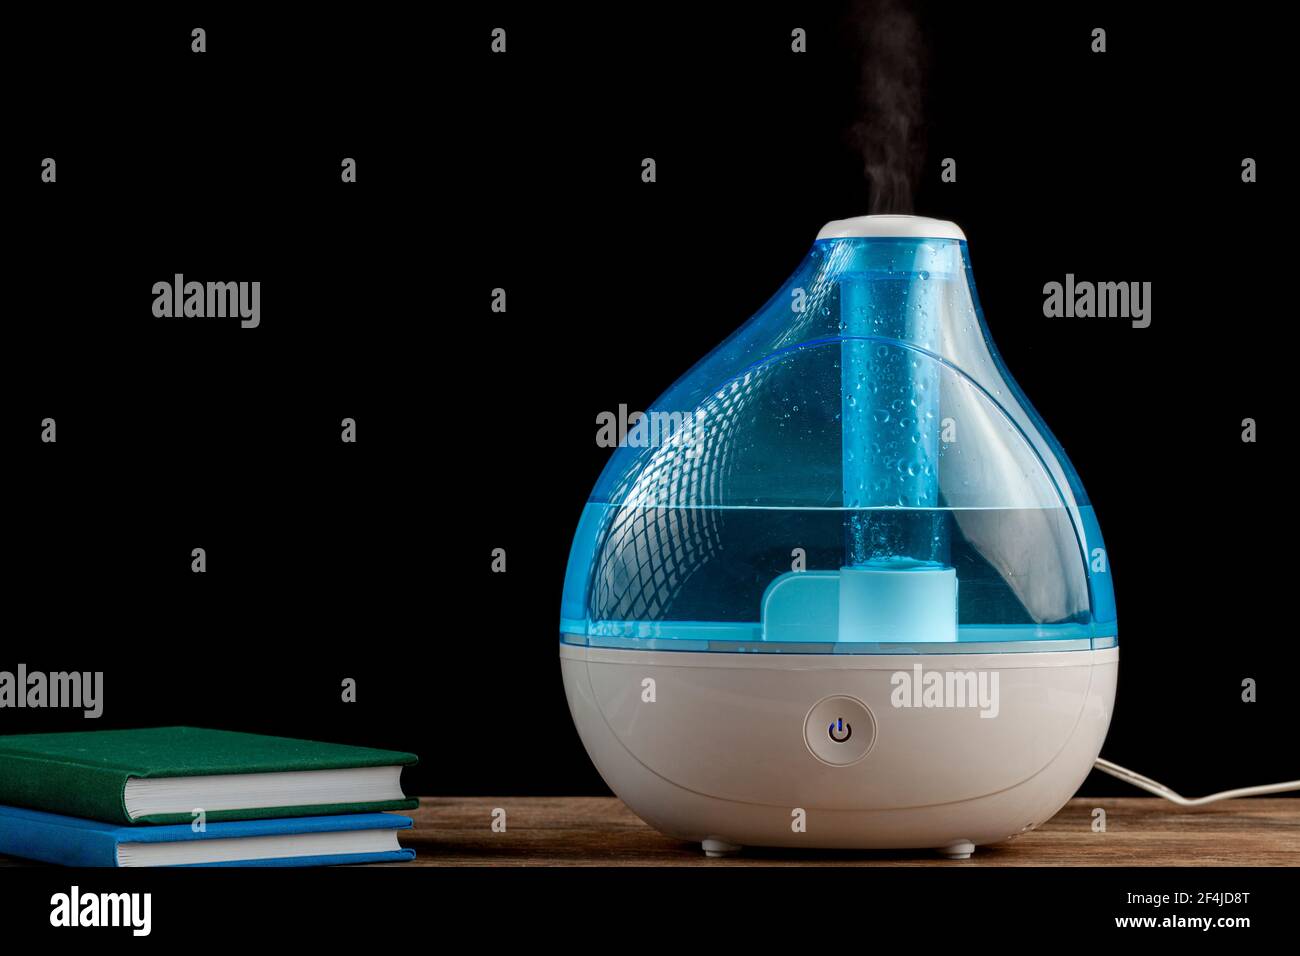 Humidifier Medical High Resolution Stock Photography and Images - Alamy